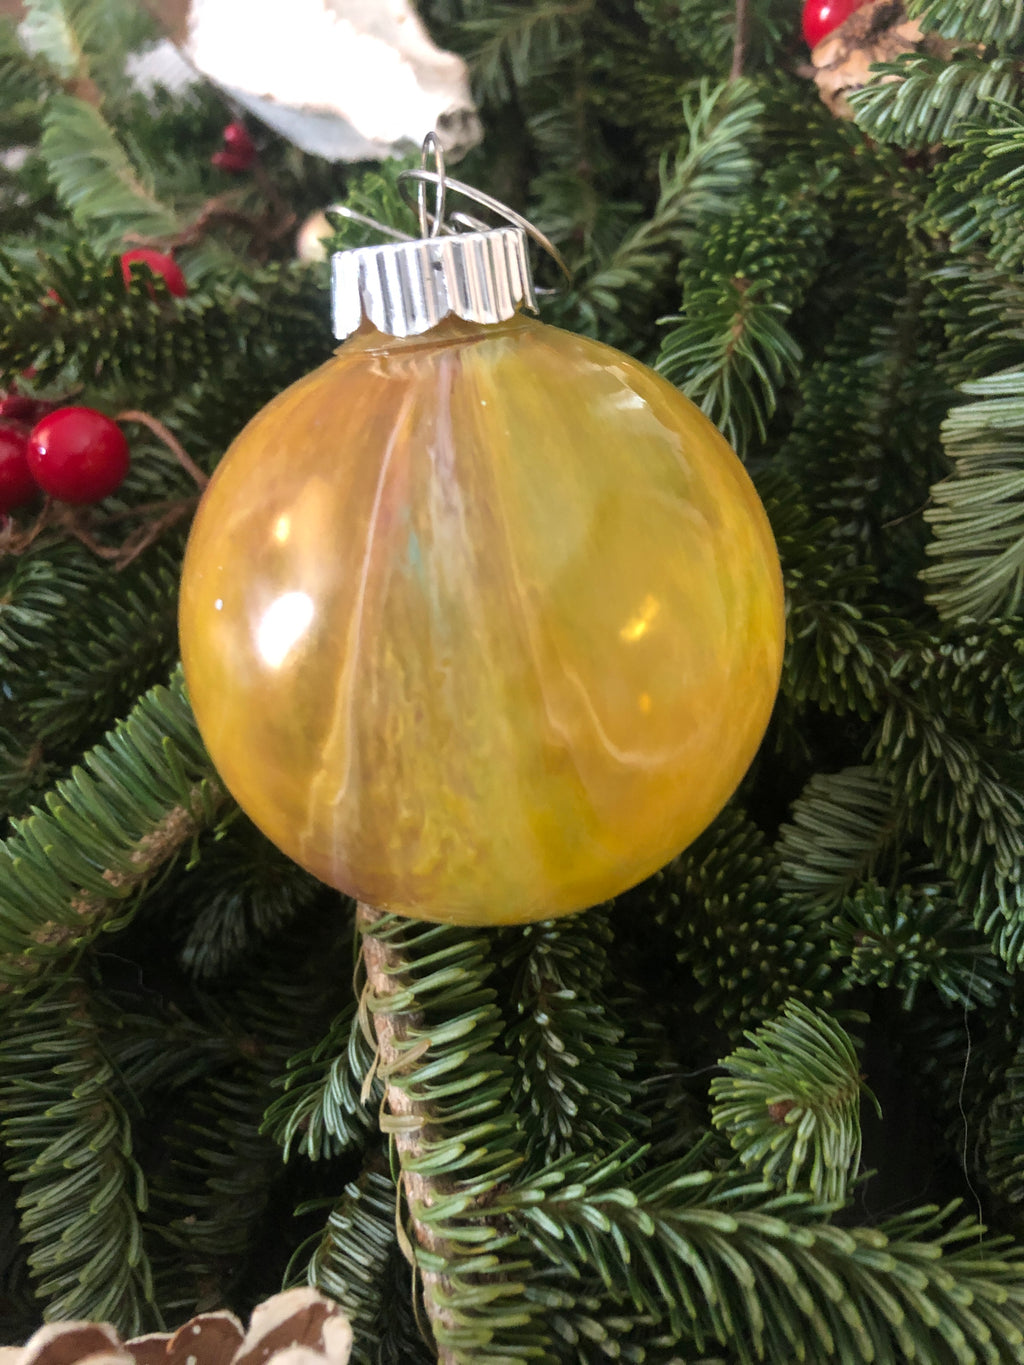 Small original, one of a kind ornament made by Ottawa-based artist Mireille Laroche.